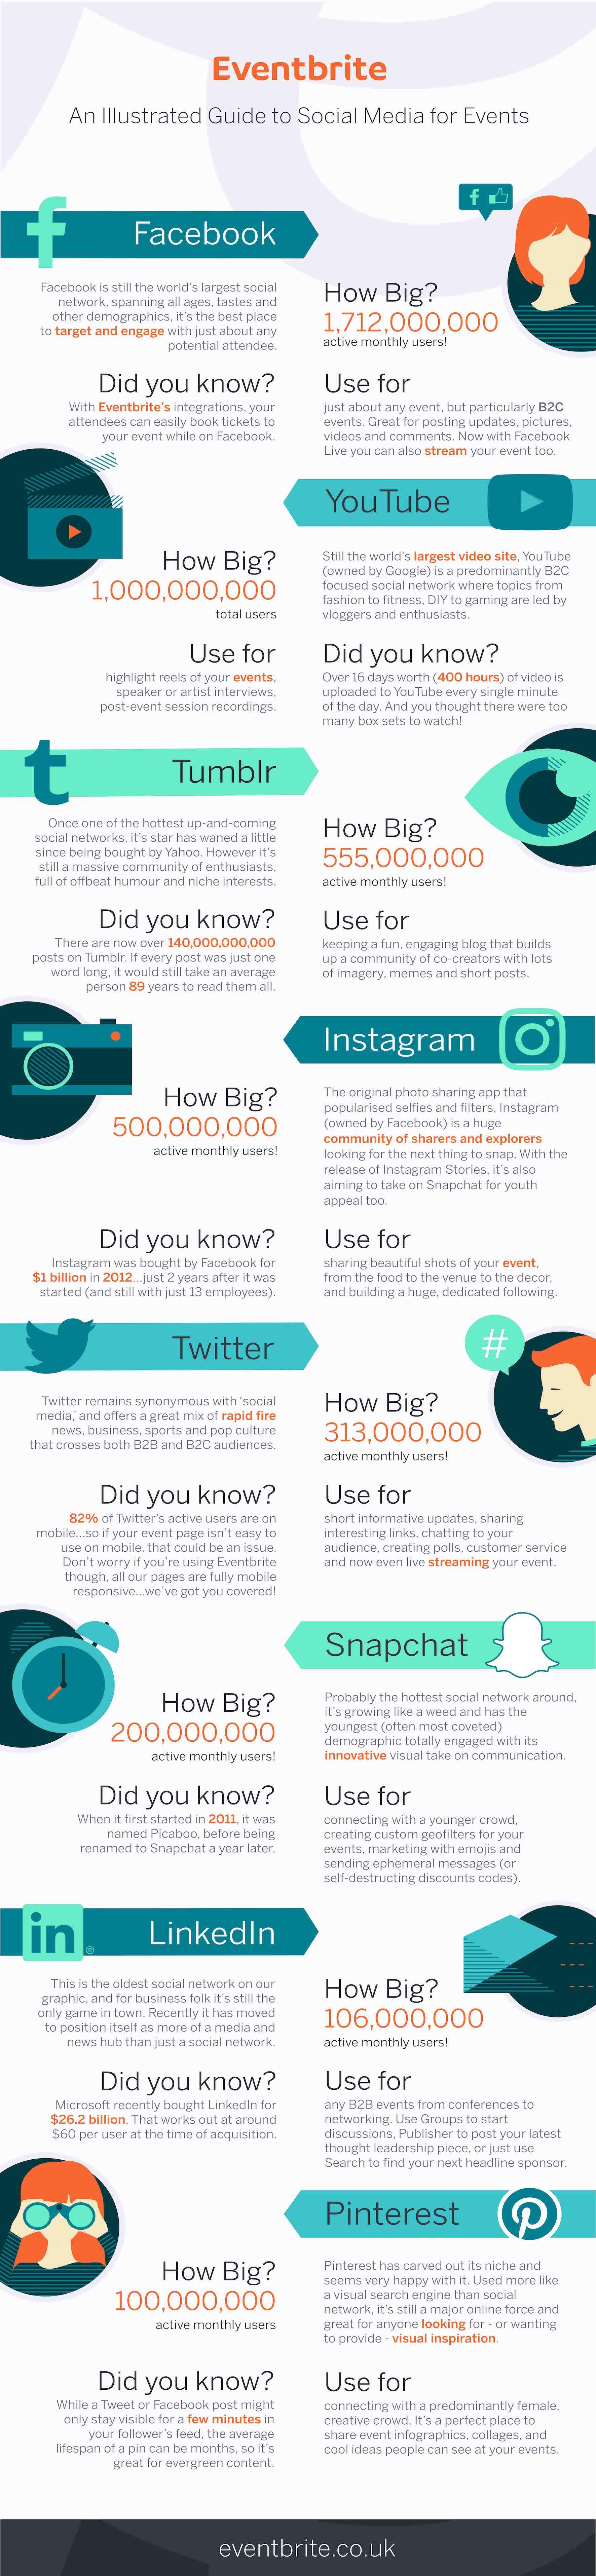 An Illustrated Guide to Social Media for Events - #infographic